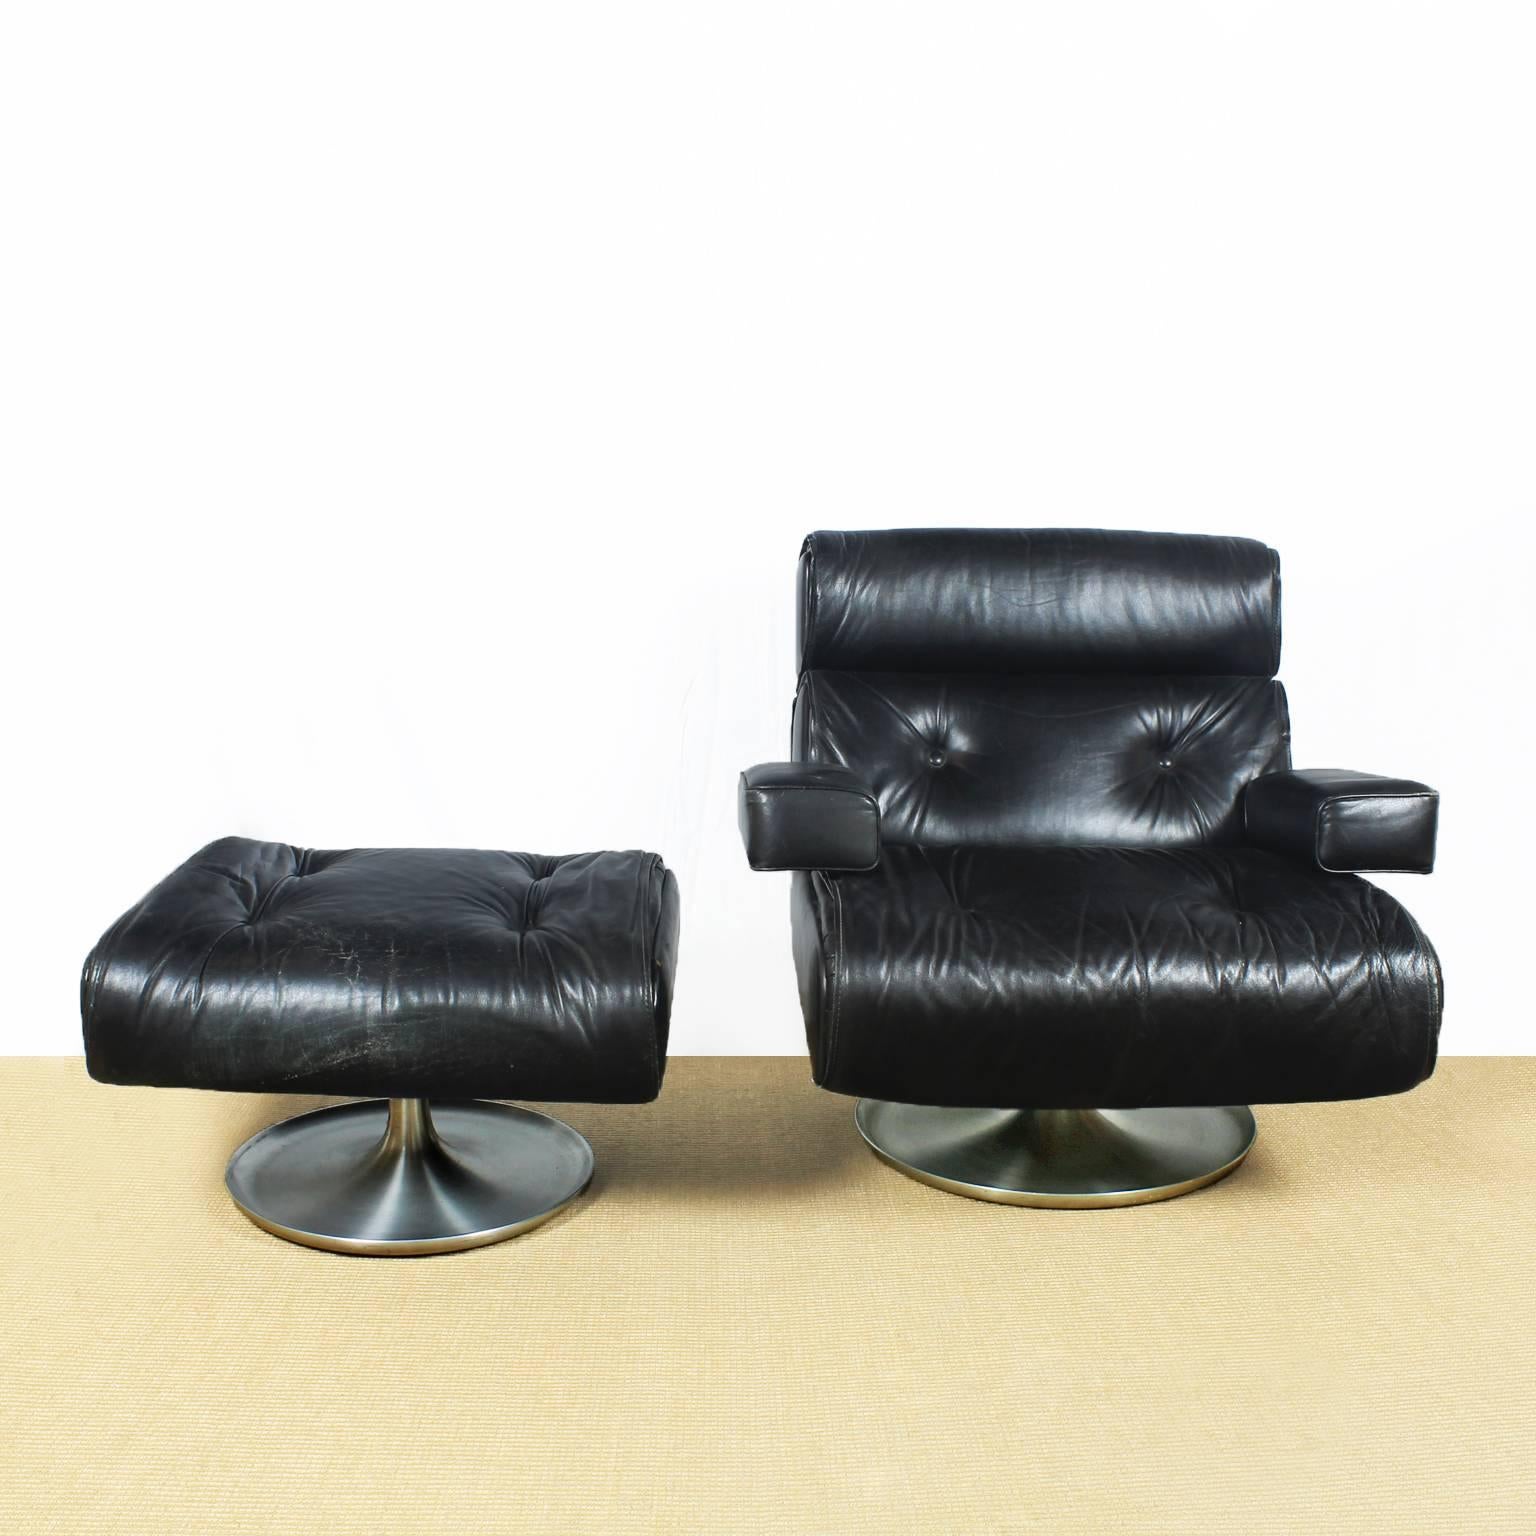 Reclining lounge chair with ottoman, cast aluminium stand and original black leather upholstery. Minor wear consistent with age and use.

Model P103.
Designer: Osvaldo Borsani.
Maker: Tecno.

Italy, circa 1960.

Ottoman measurements: 68 x 58